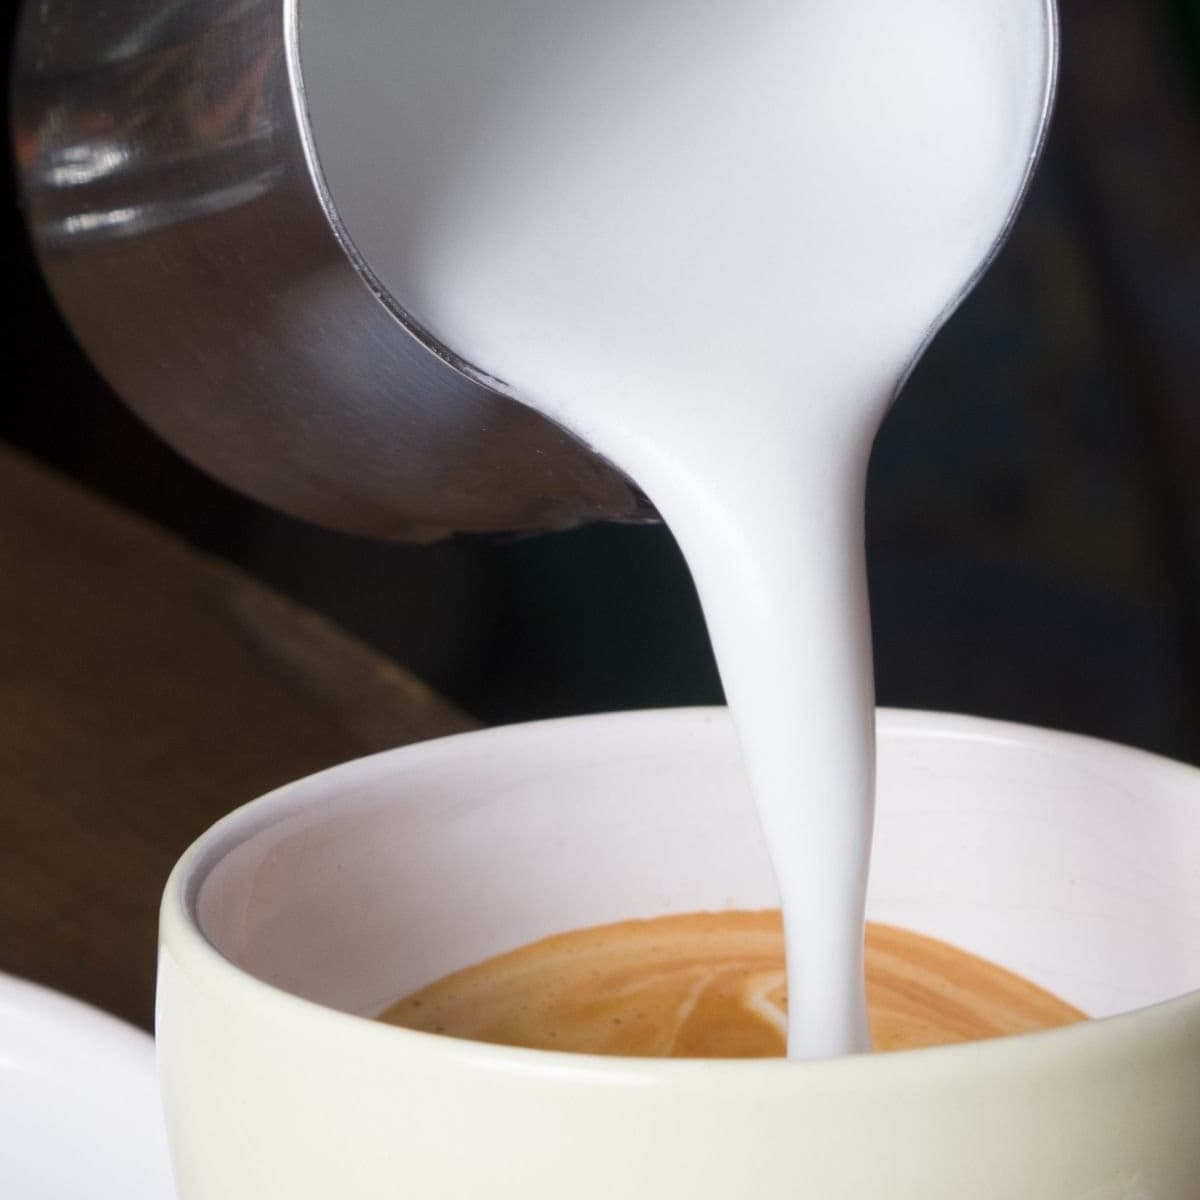 Hot, foamy milk being poured into a cup of coffee.